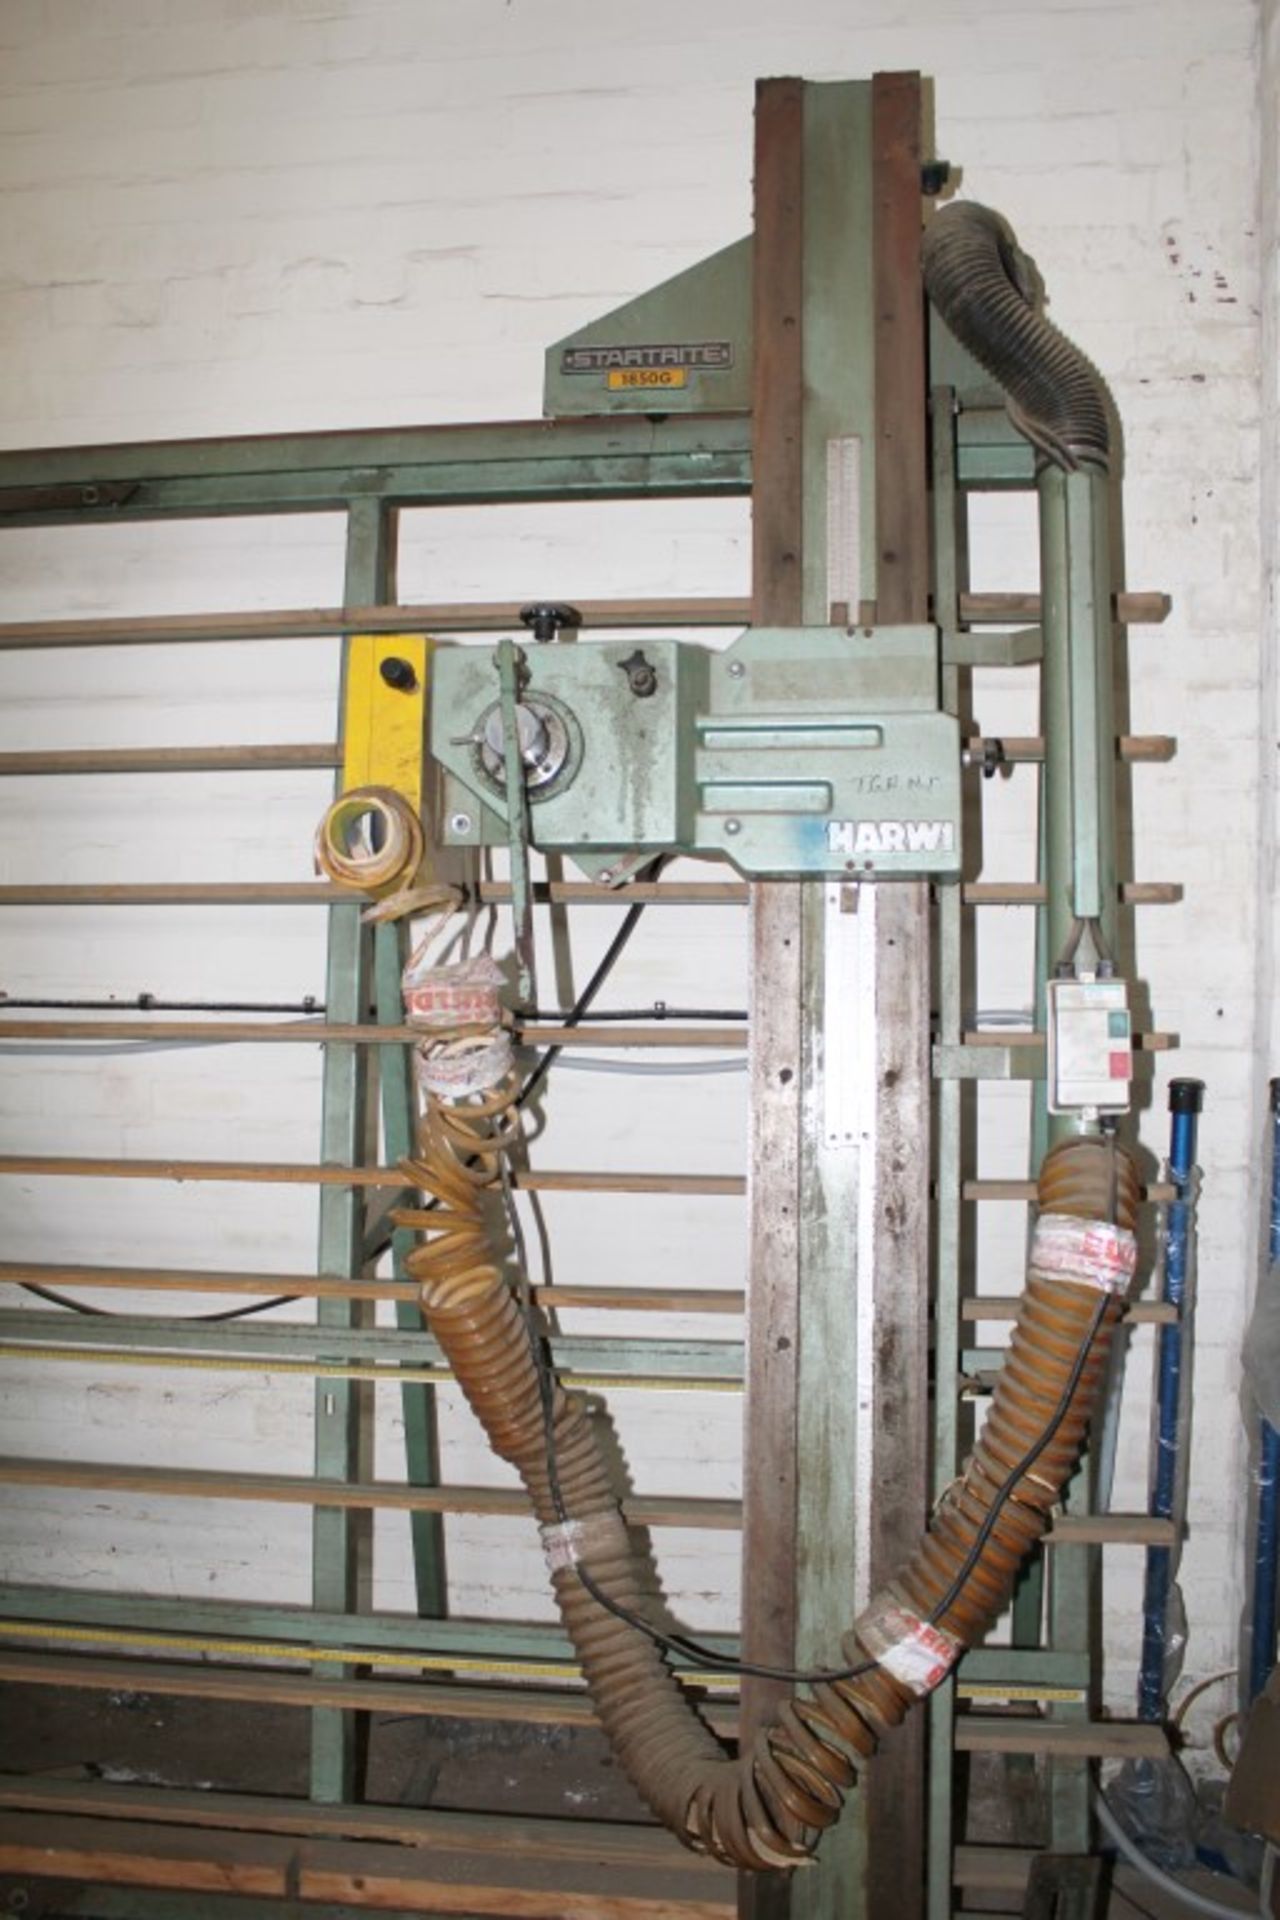 1 x Startrite Harwi 1850G Wood Cutting Vertical Wall Saw - 3 Phase - Working Order - Approx Length - Image 4 of 6